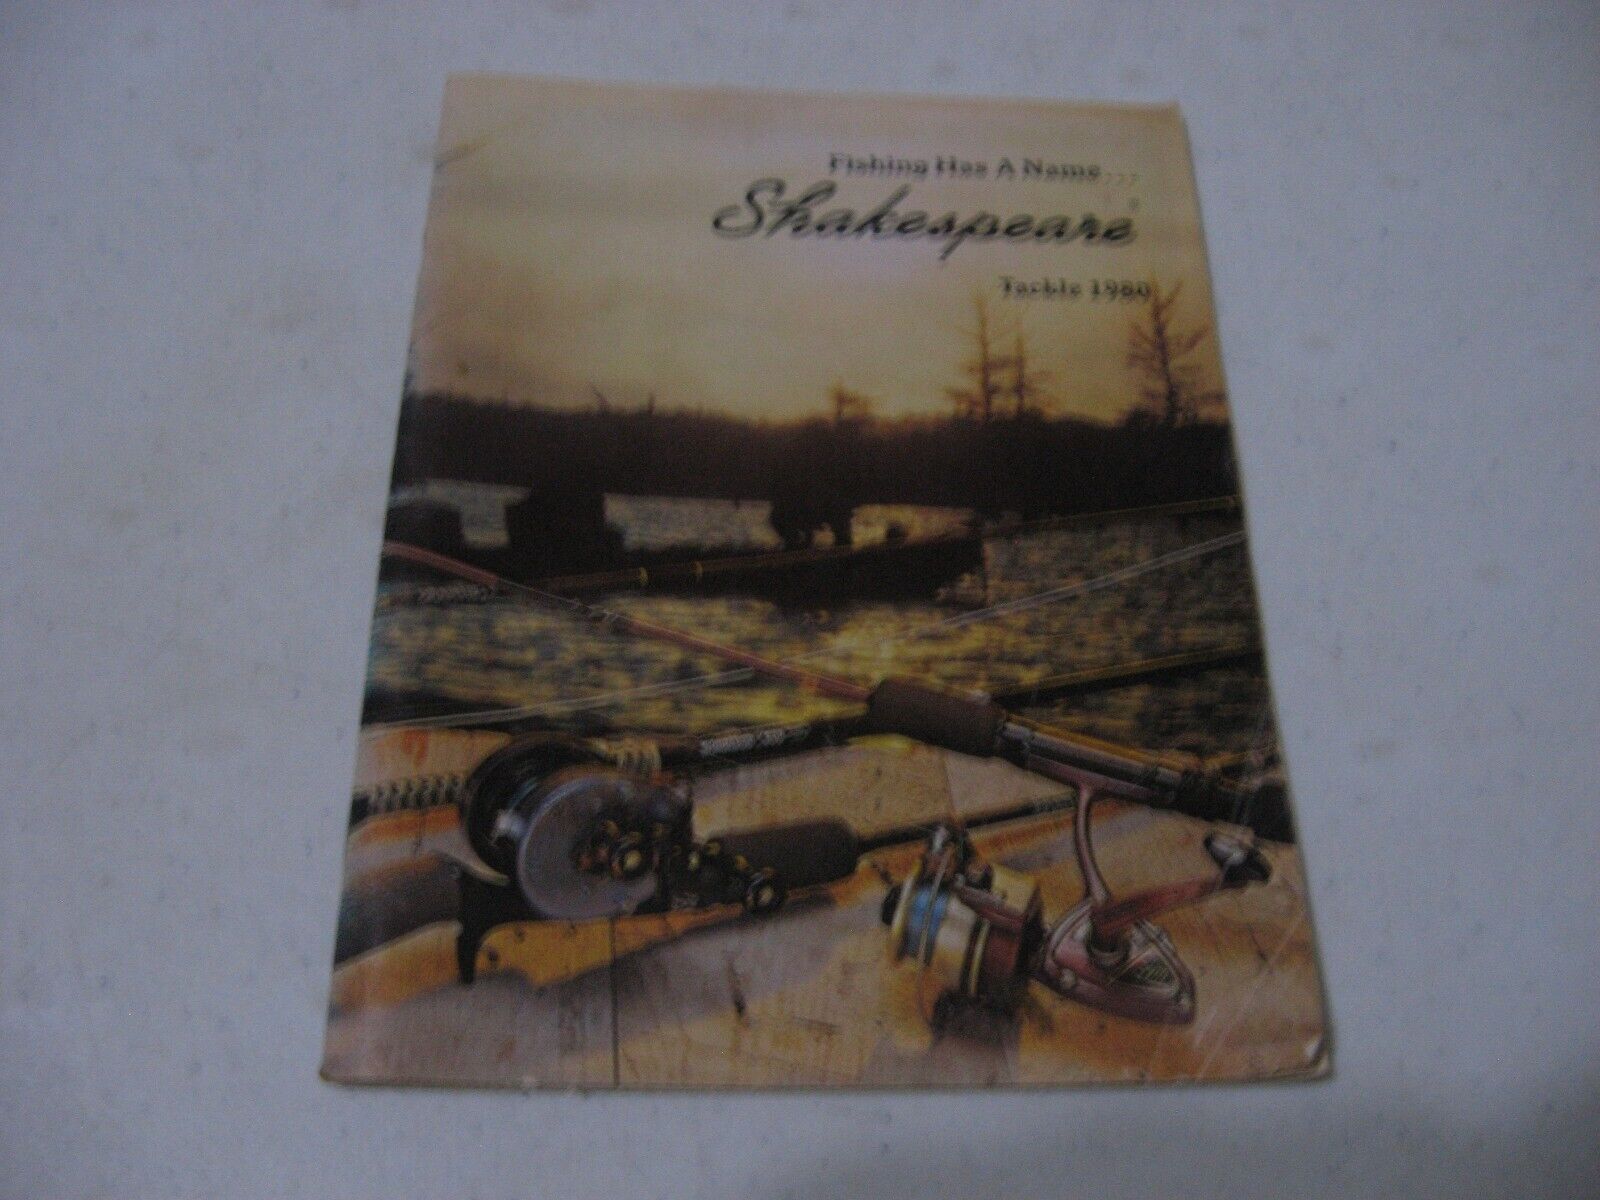 1980 Shakespeare Fishing Tackle Catalog - 63 Pages